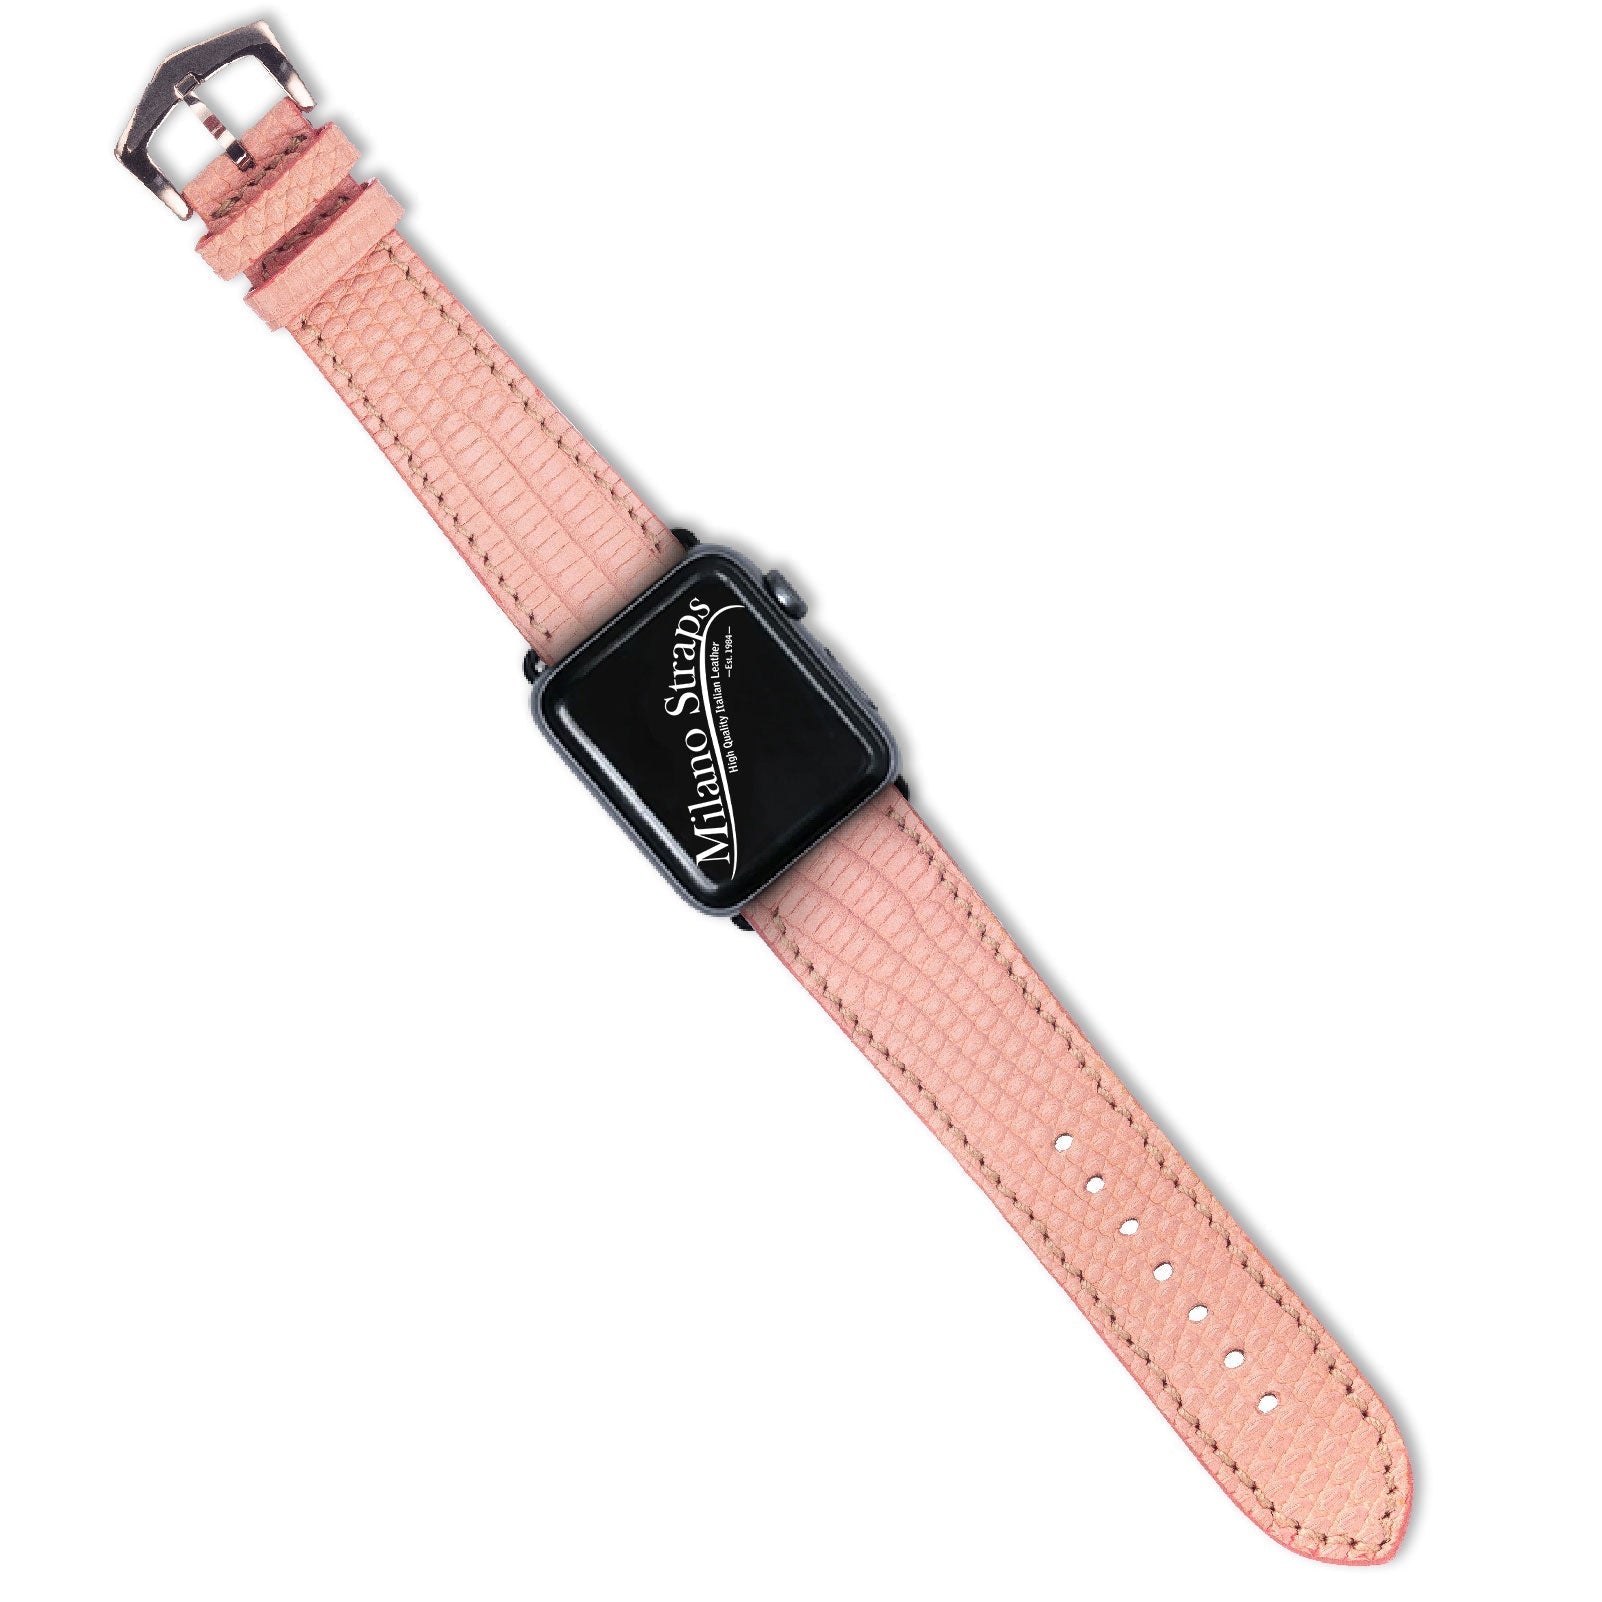 Louis Vuitton Apple Watch Band Straps Compatible iWatch Replacement Leather  Band - Louis Vuitton Case